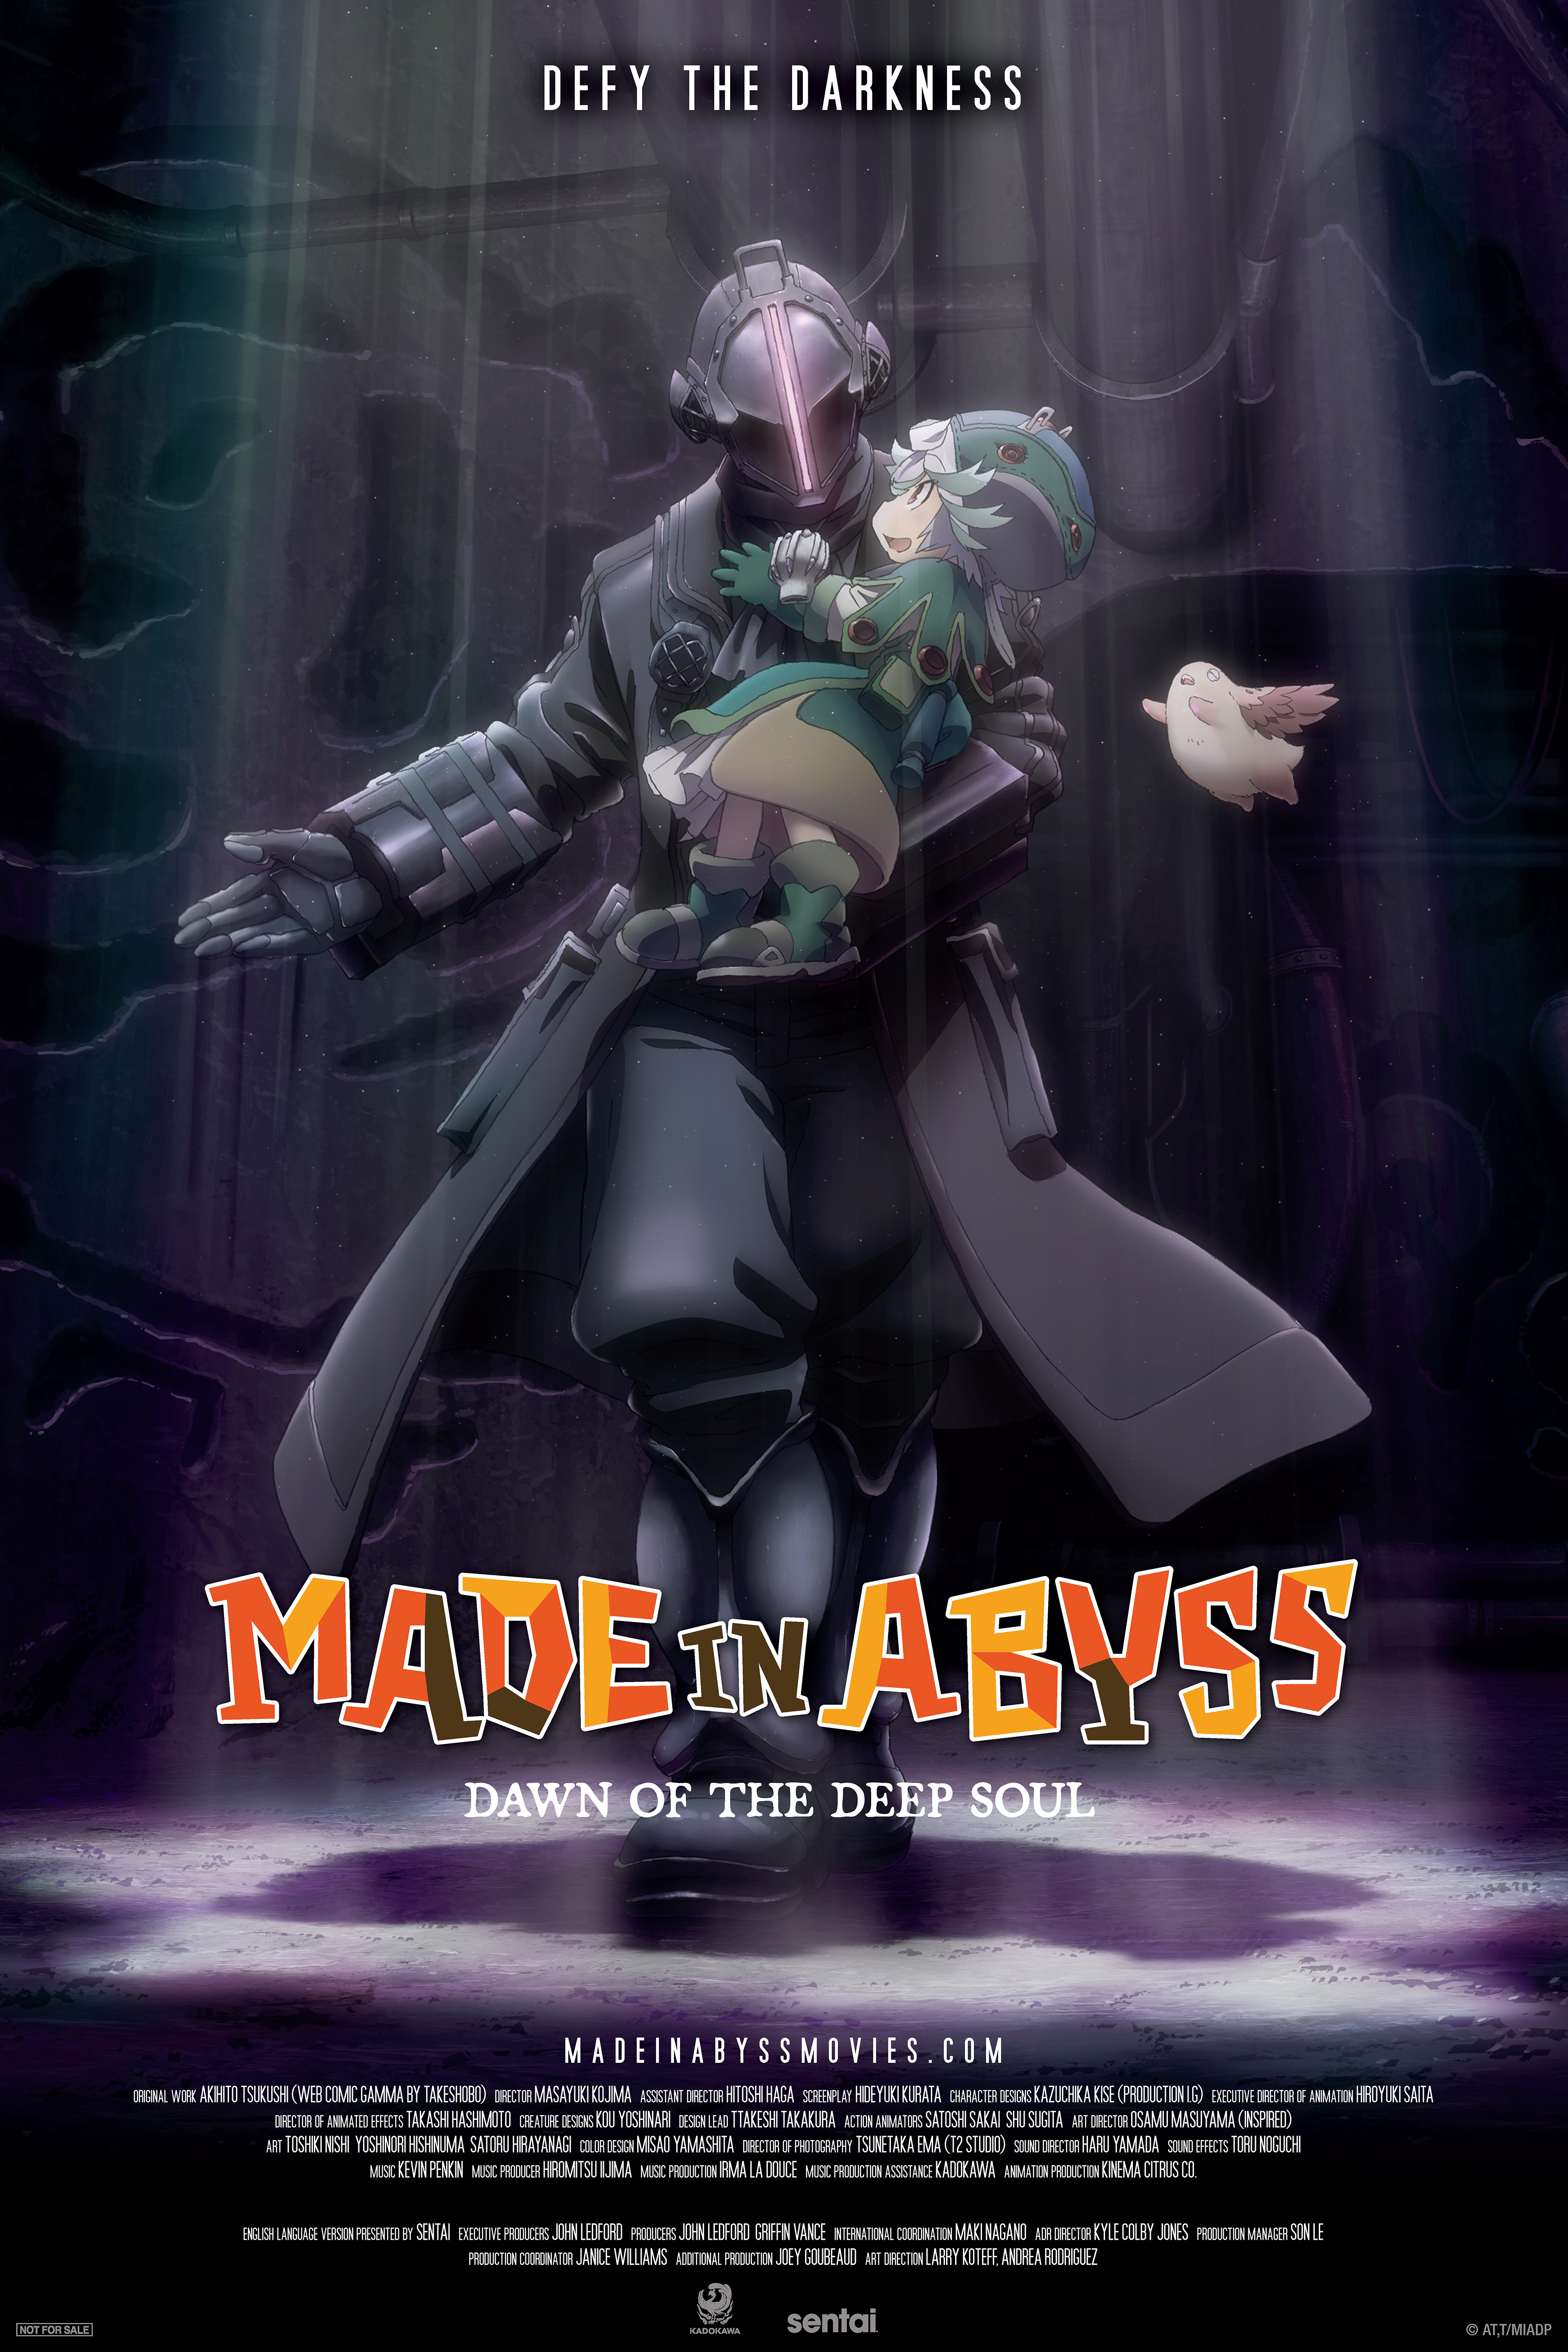 Made in Abyss (TV Series 2017– ) - Episode list - IMDb